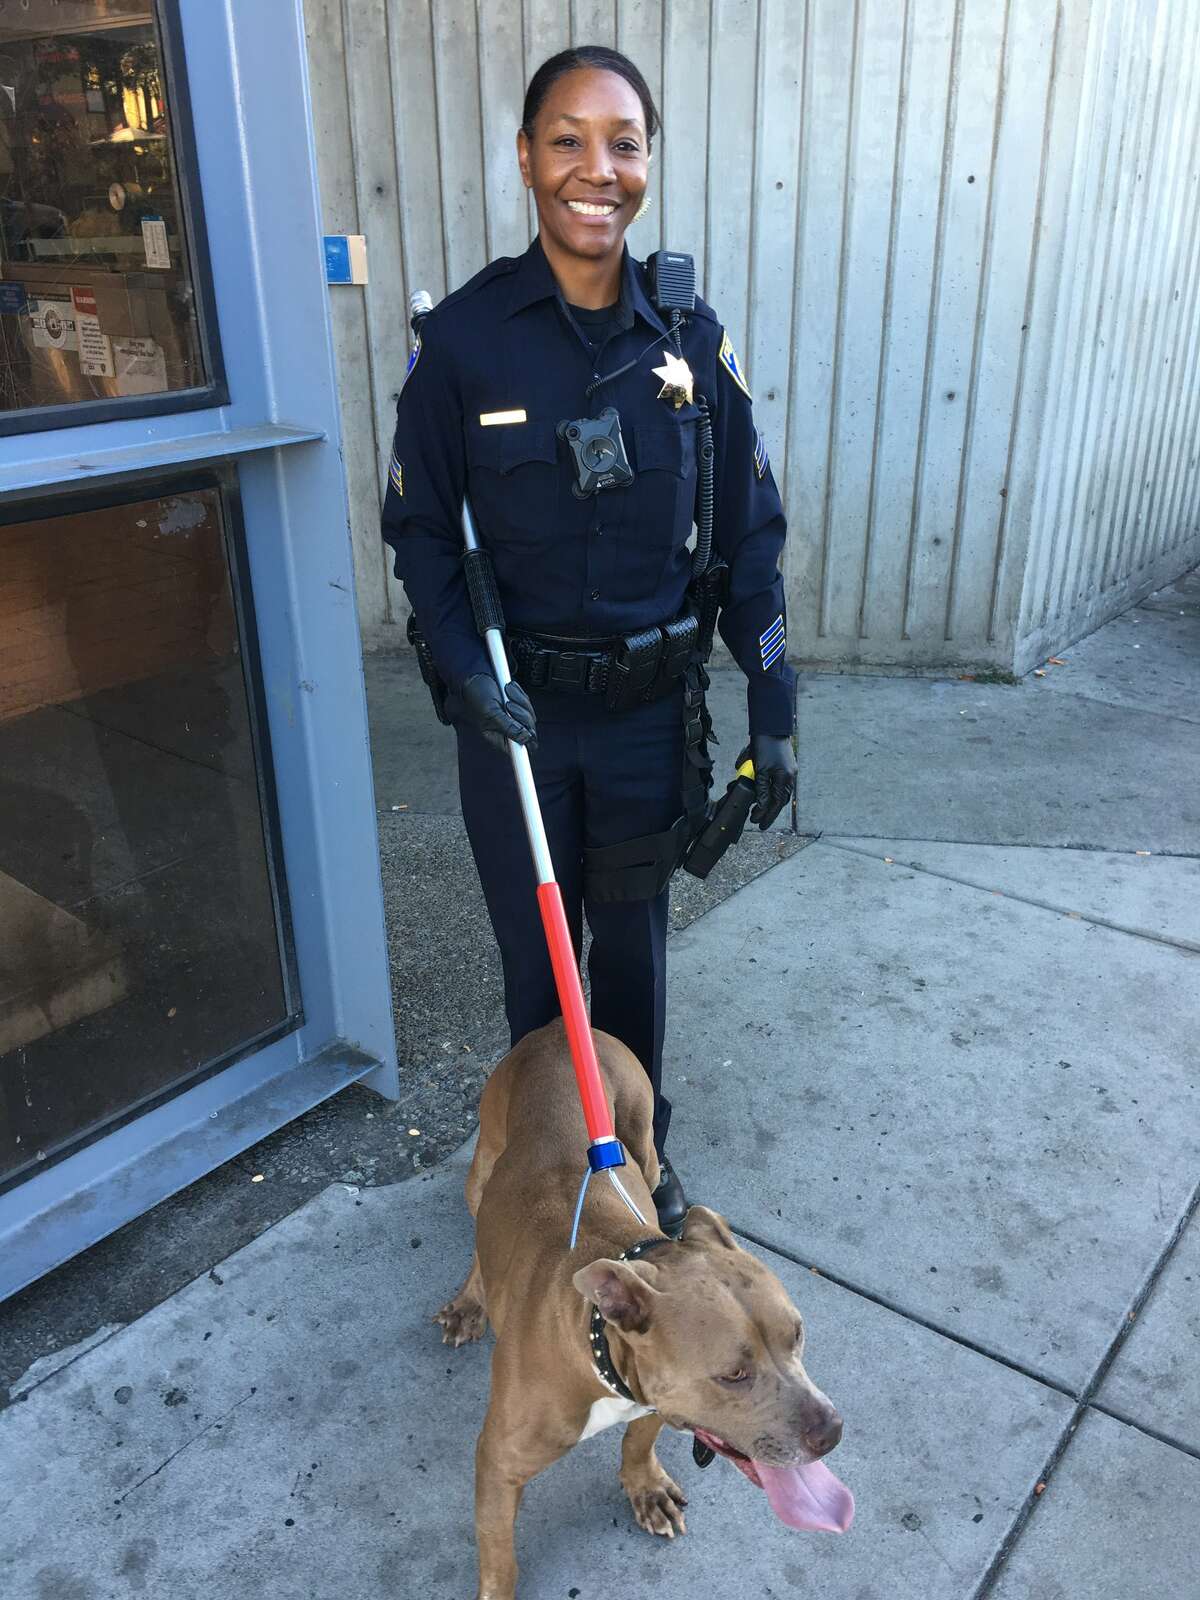 A dog was rescued from the BART tracks on Wednesday after causing delays during the morning commute.